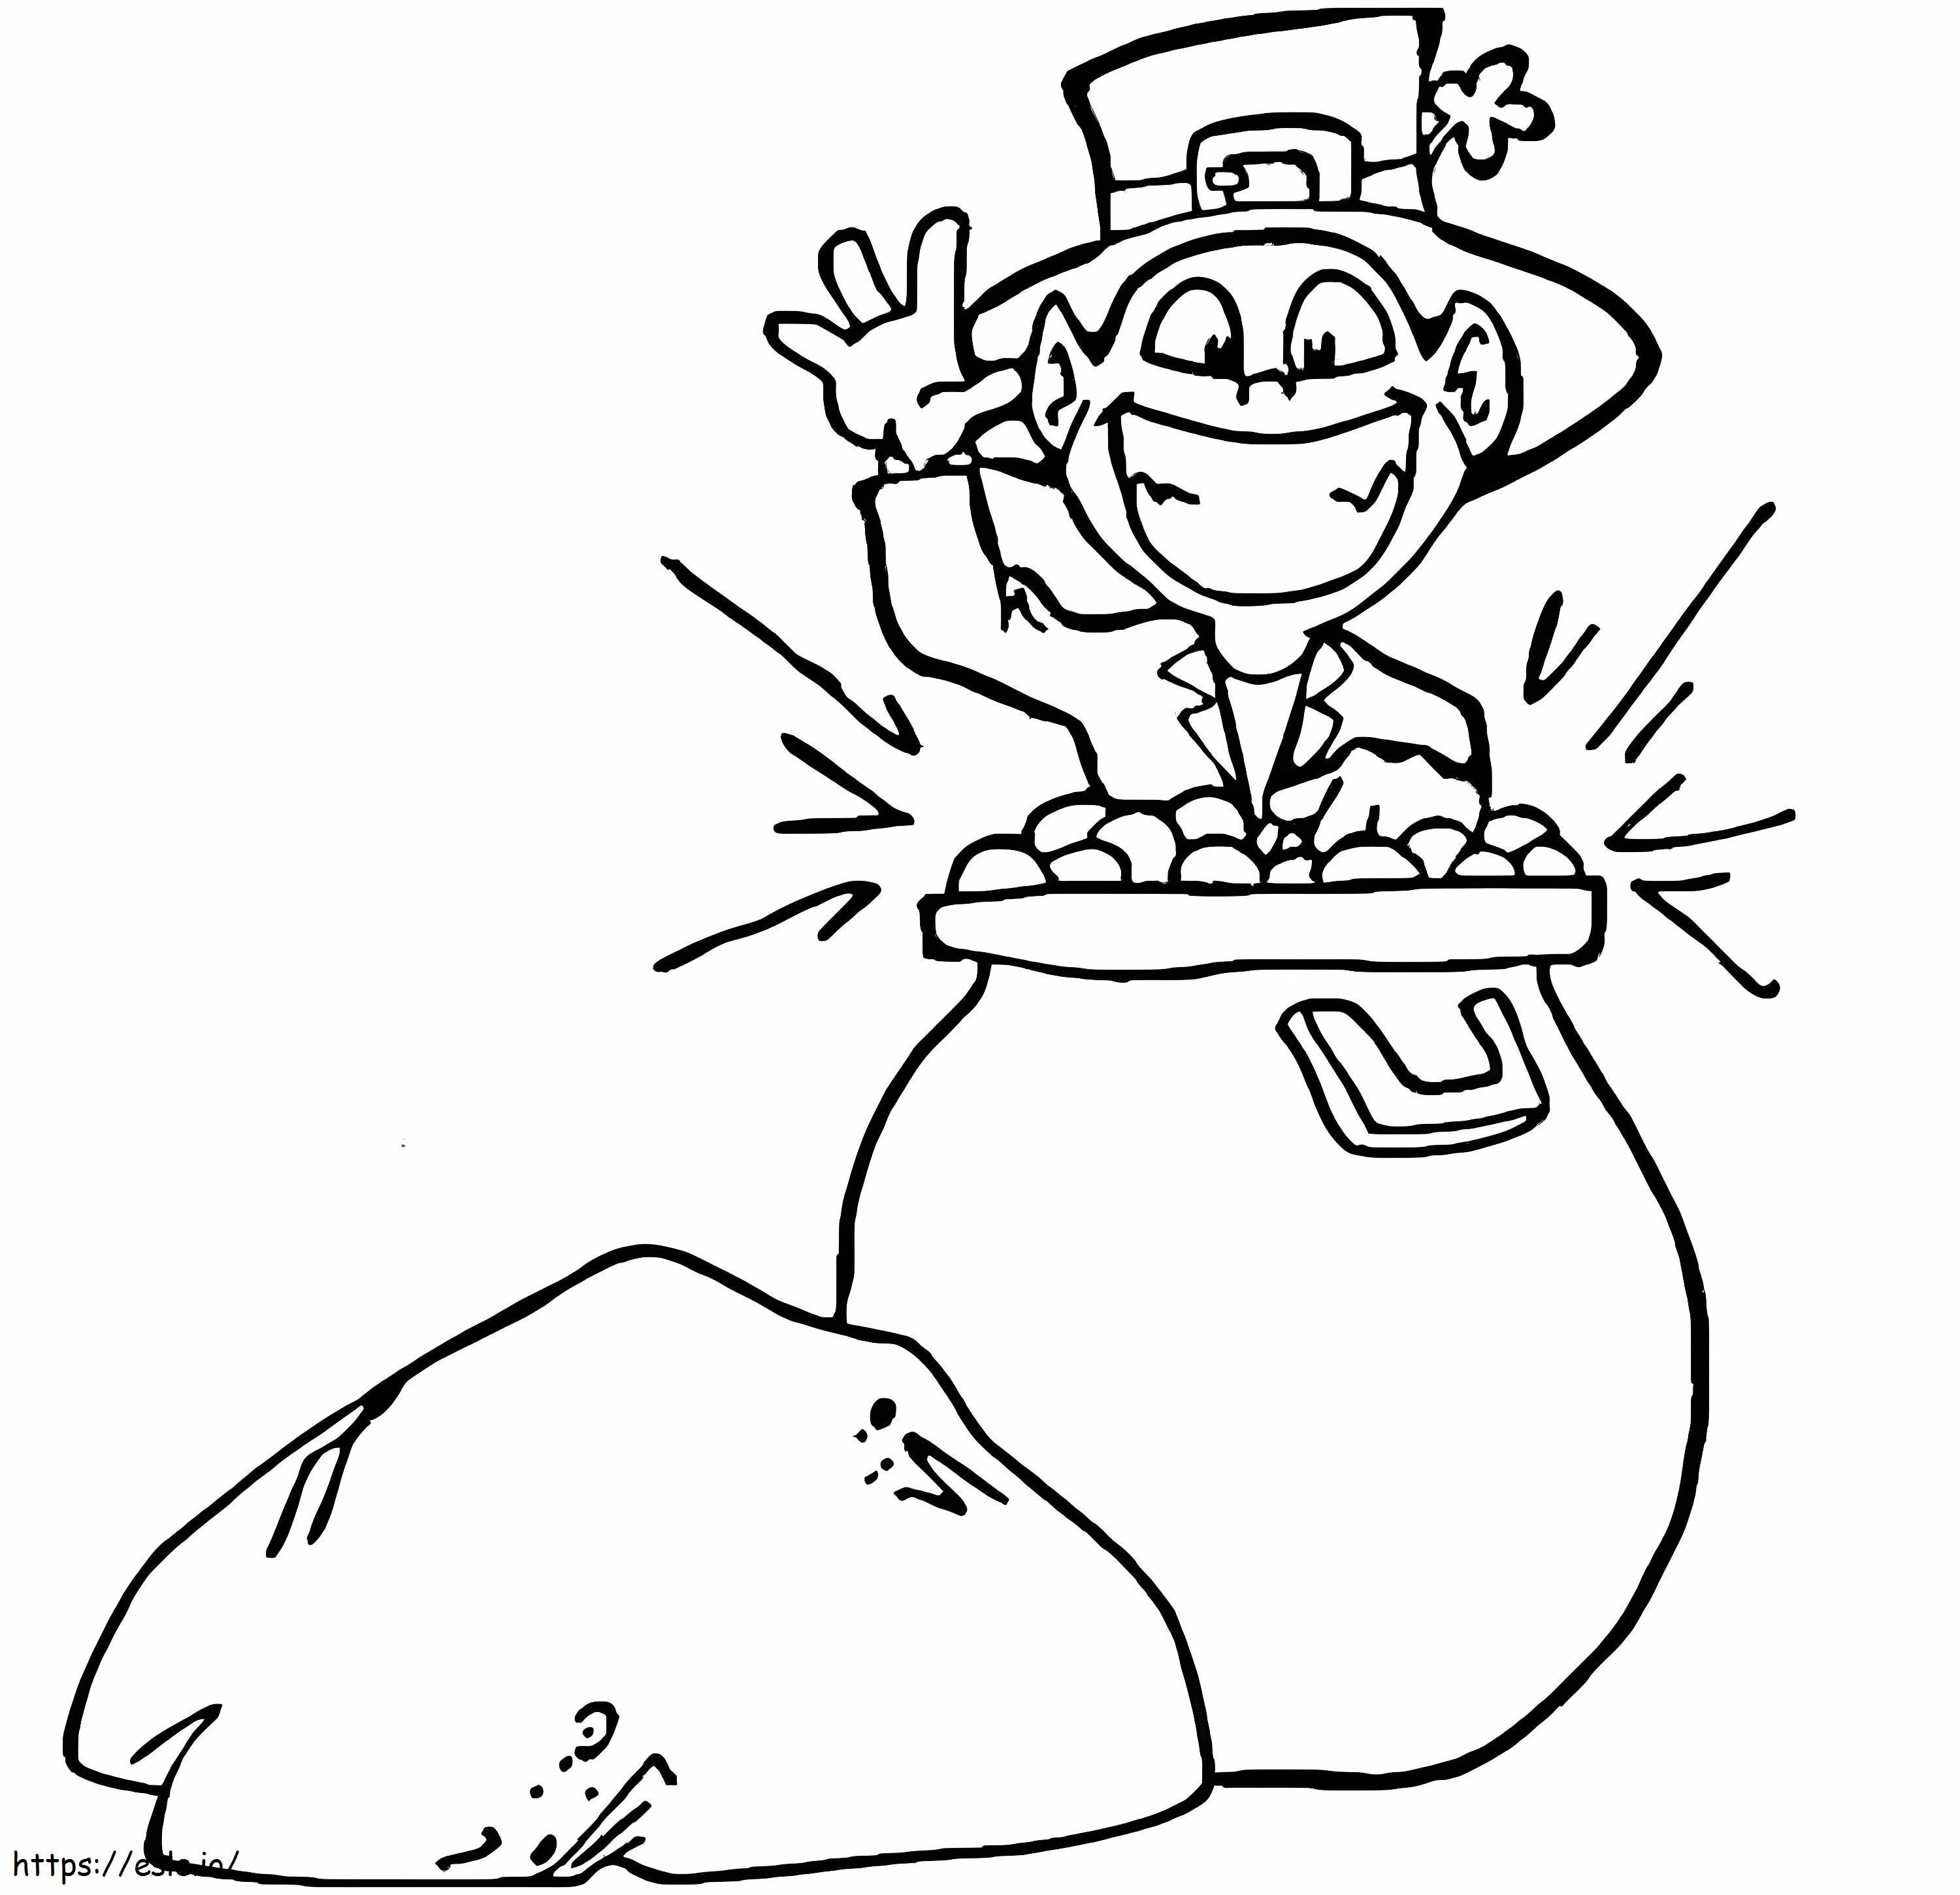 Leprechaun In Pot Of Gold coloring page